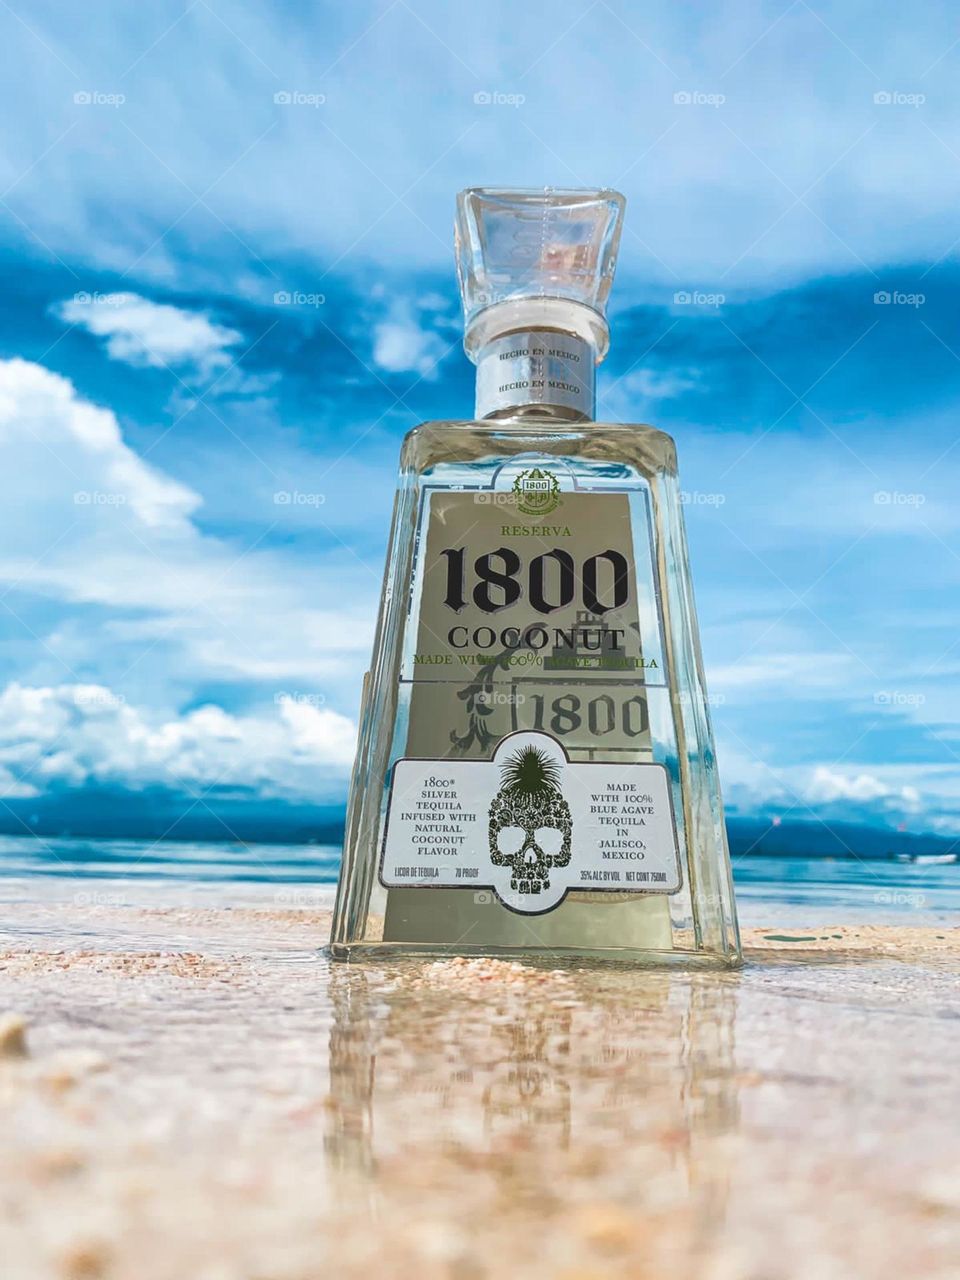 A photo product of alcoholic drink in one of beaches in Bali. This photo shows the beauty nature of Indonesia represented by the beach amd the blue sky.